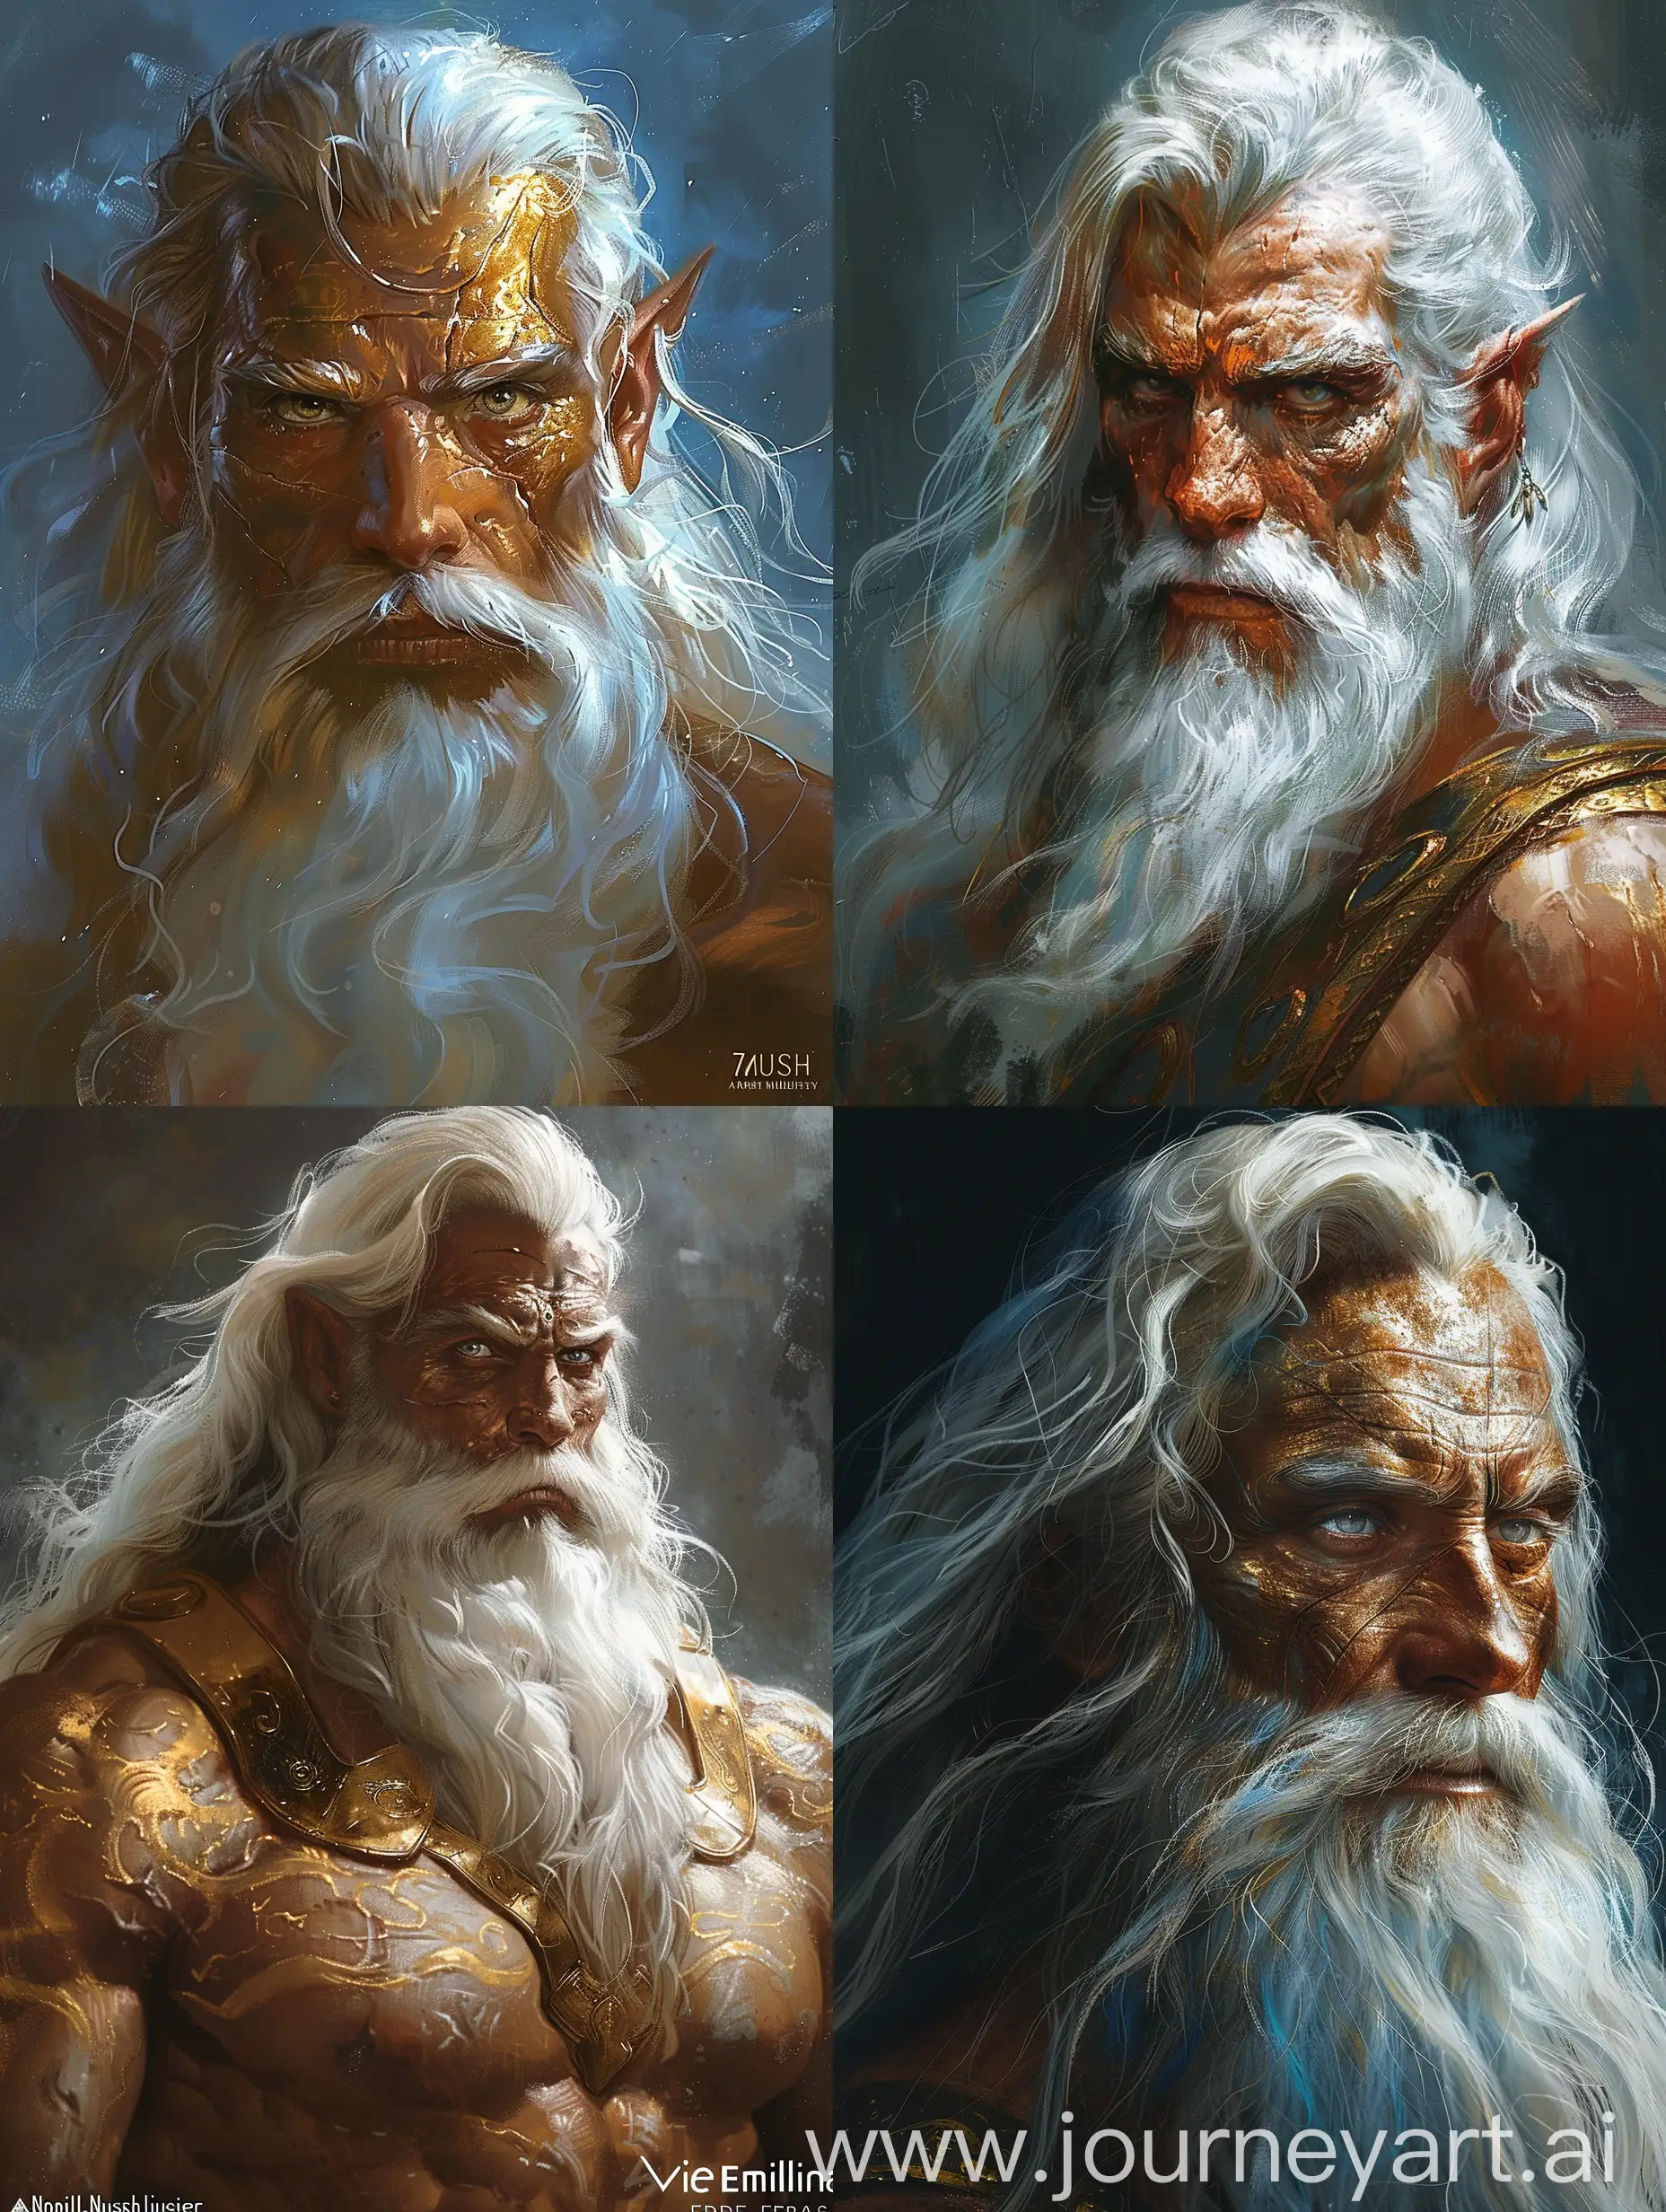 Subject: the god Zeus; weathered bronze skin, pure white eyes, muscular and regal haughty good looks, long white haor, long white beard.  Style/coloring: extremely realistic painted realism, detailed digital painting concept art, detailed paiting by gaston bussiere, craig mullins A mystical, dreamlike portrait in a cinematic style, Ed Emsh, Virgil Finlay, Norman Saunders, Hubert Rogers, Earle Bergey, Kelly Freas --upbeta --s 250